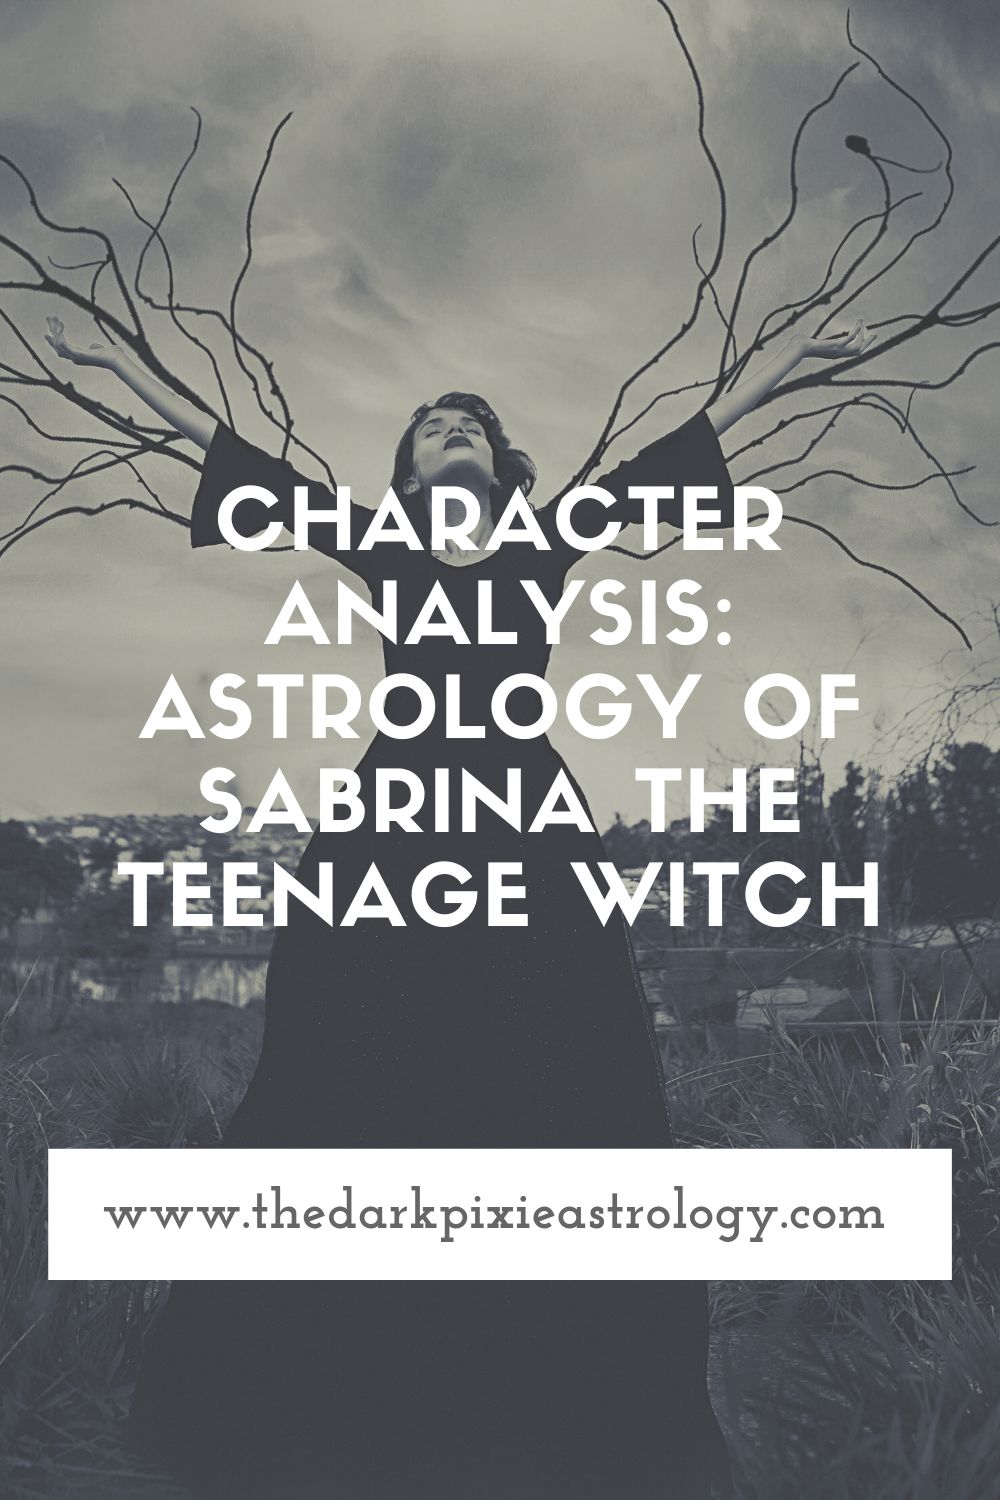 Character Analysis: Astrology of Sabrina the Teenage Witch - The Dark Pixie Astrology